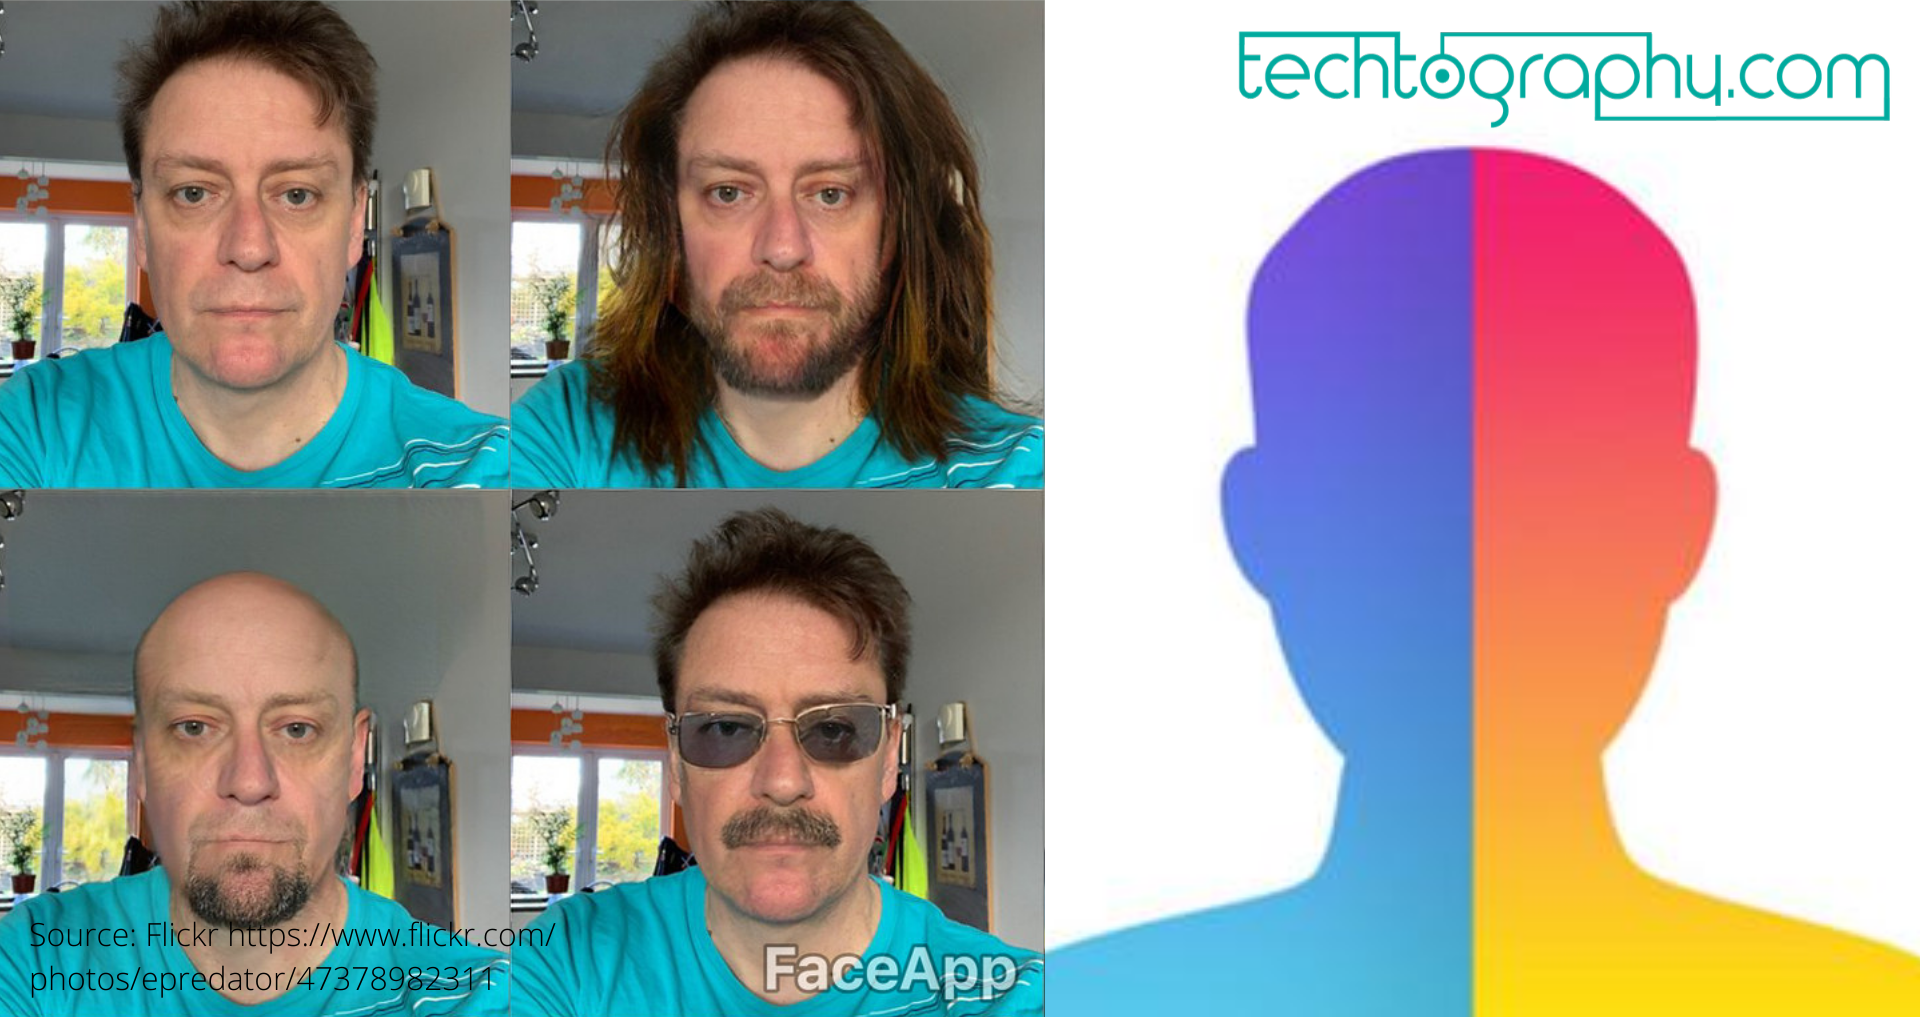 Is It Safe to Use FaceApp in 2020?